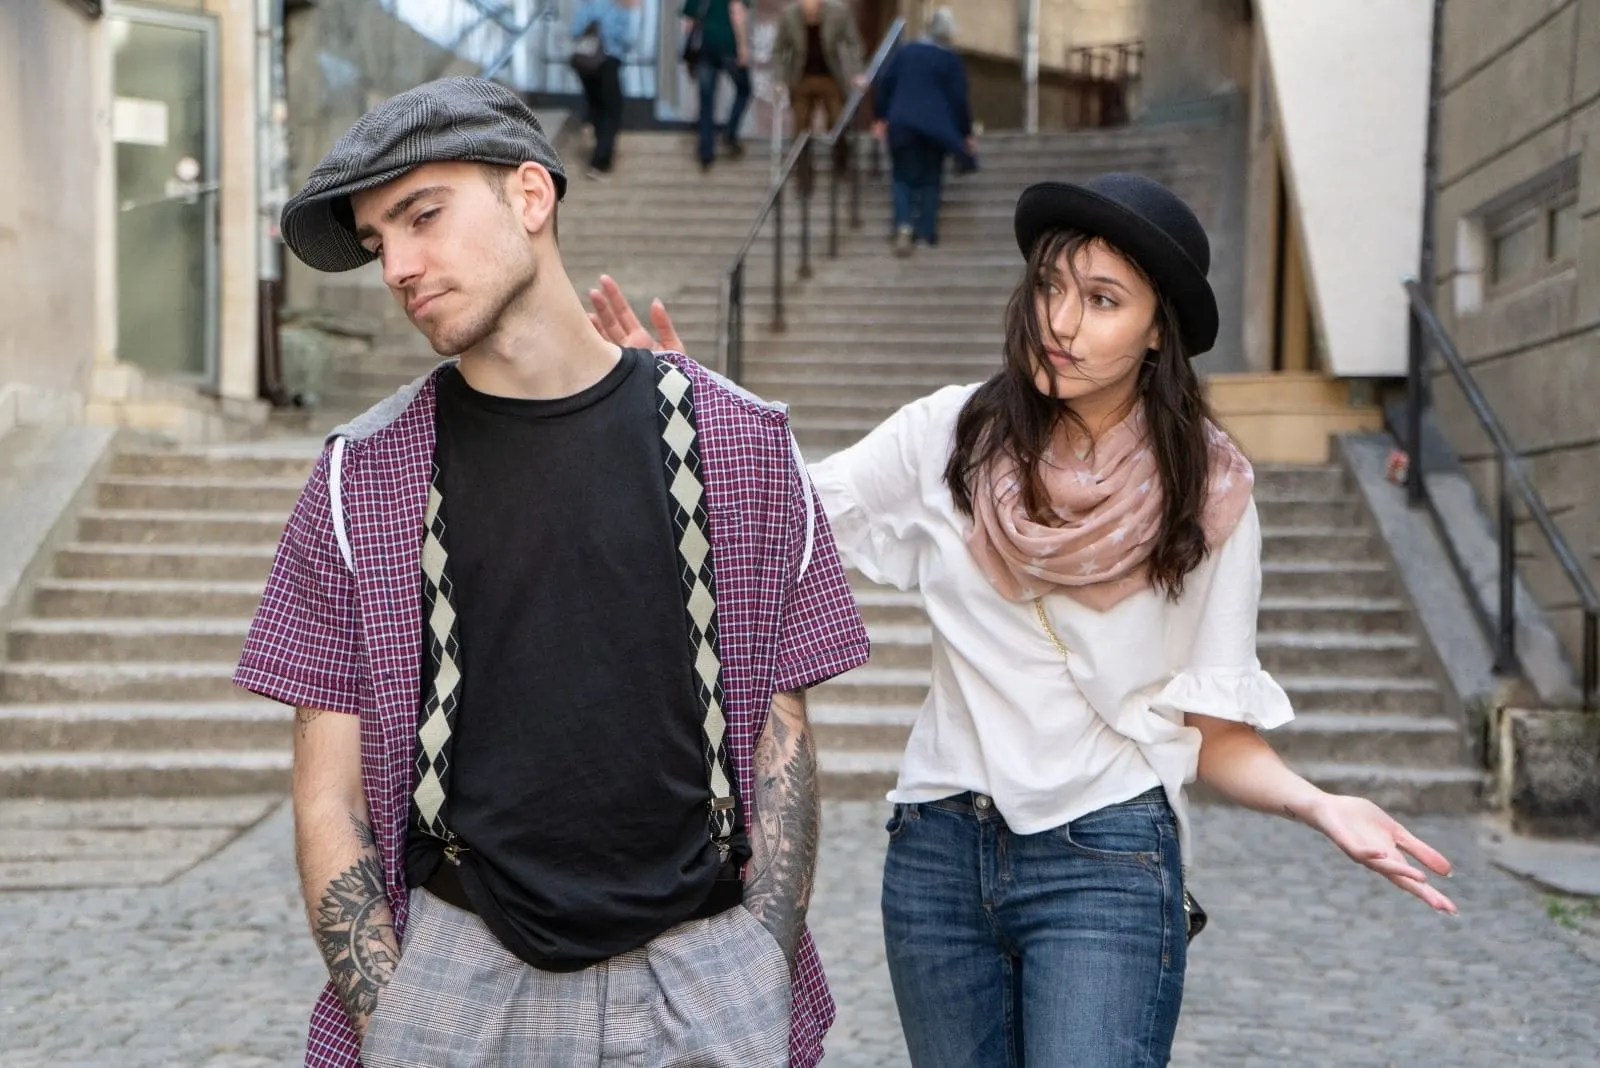 young couple walking in the city arguing or discussing